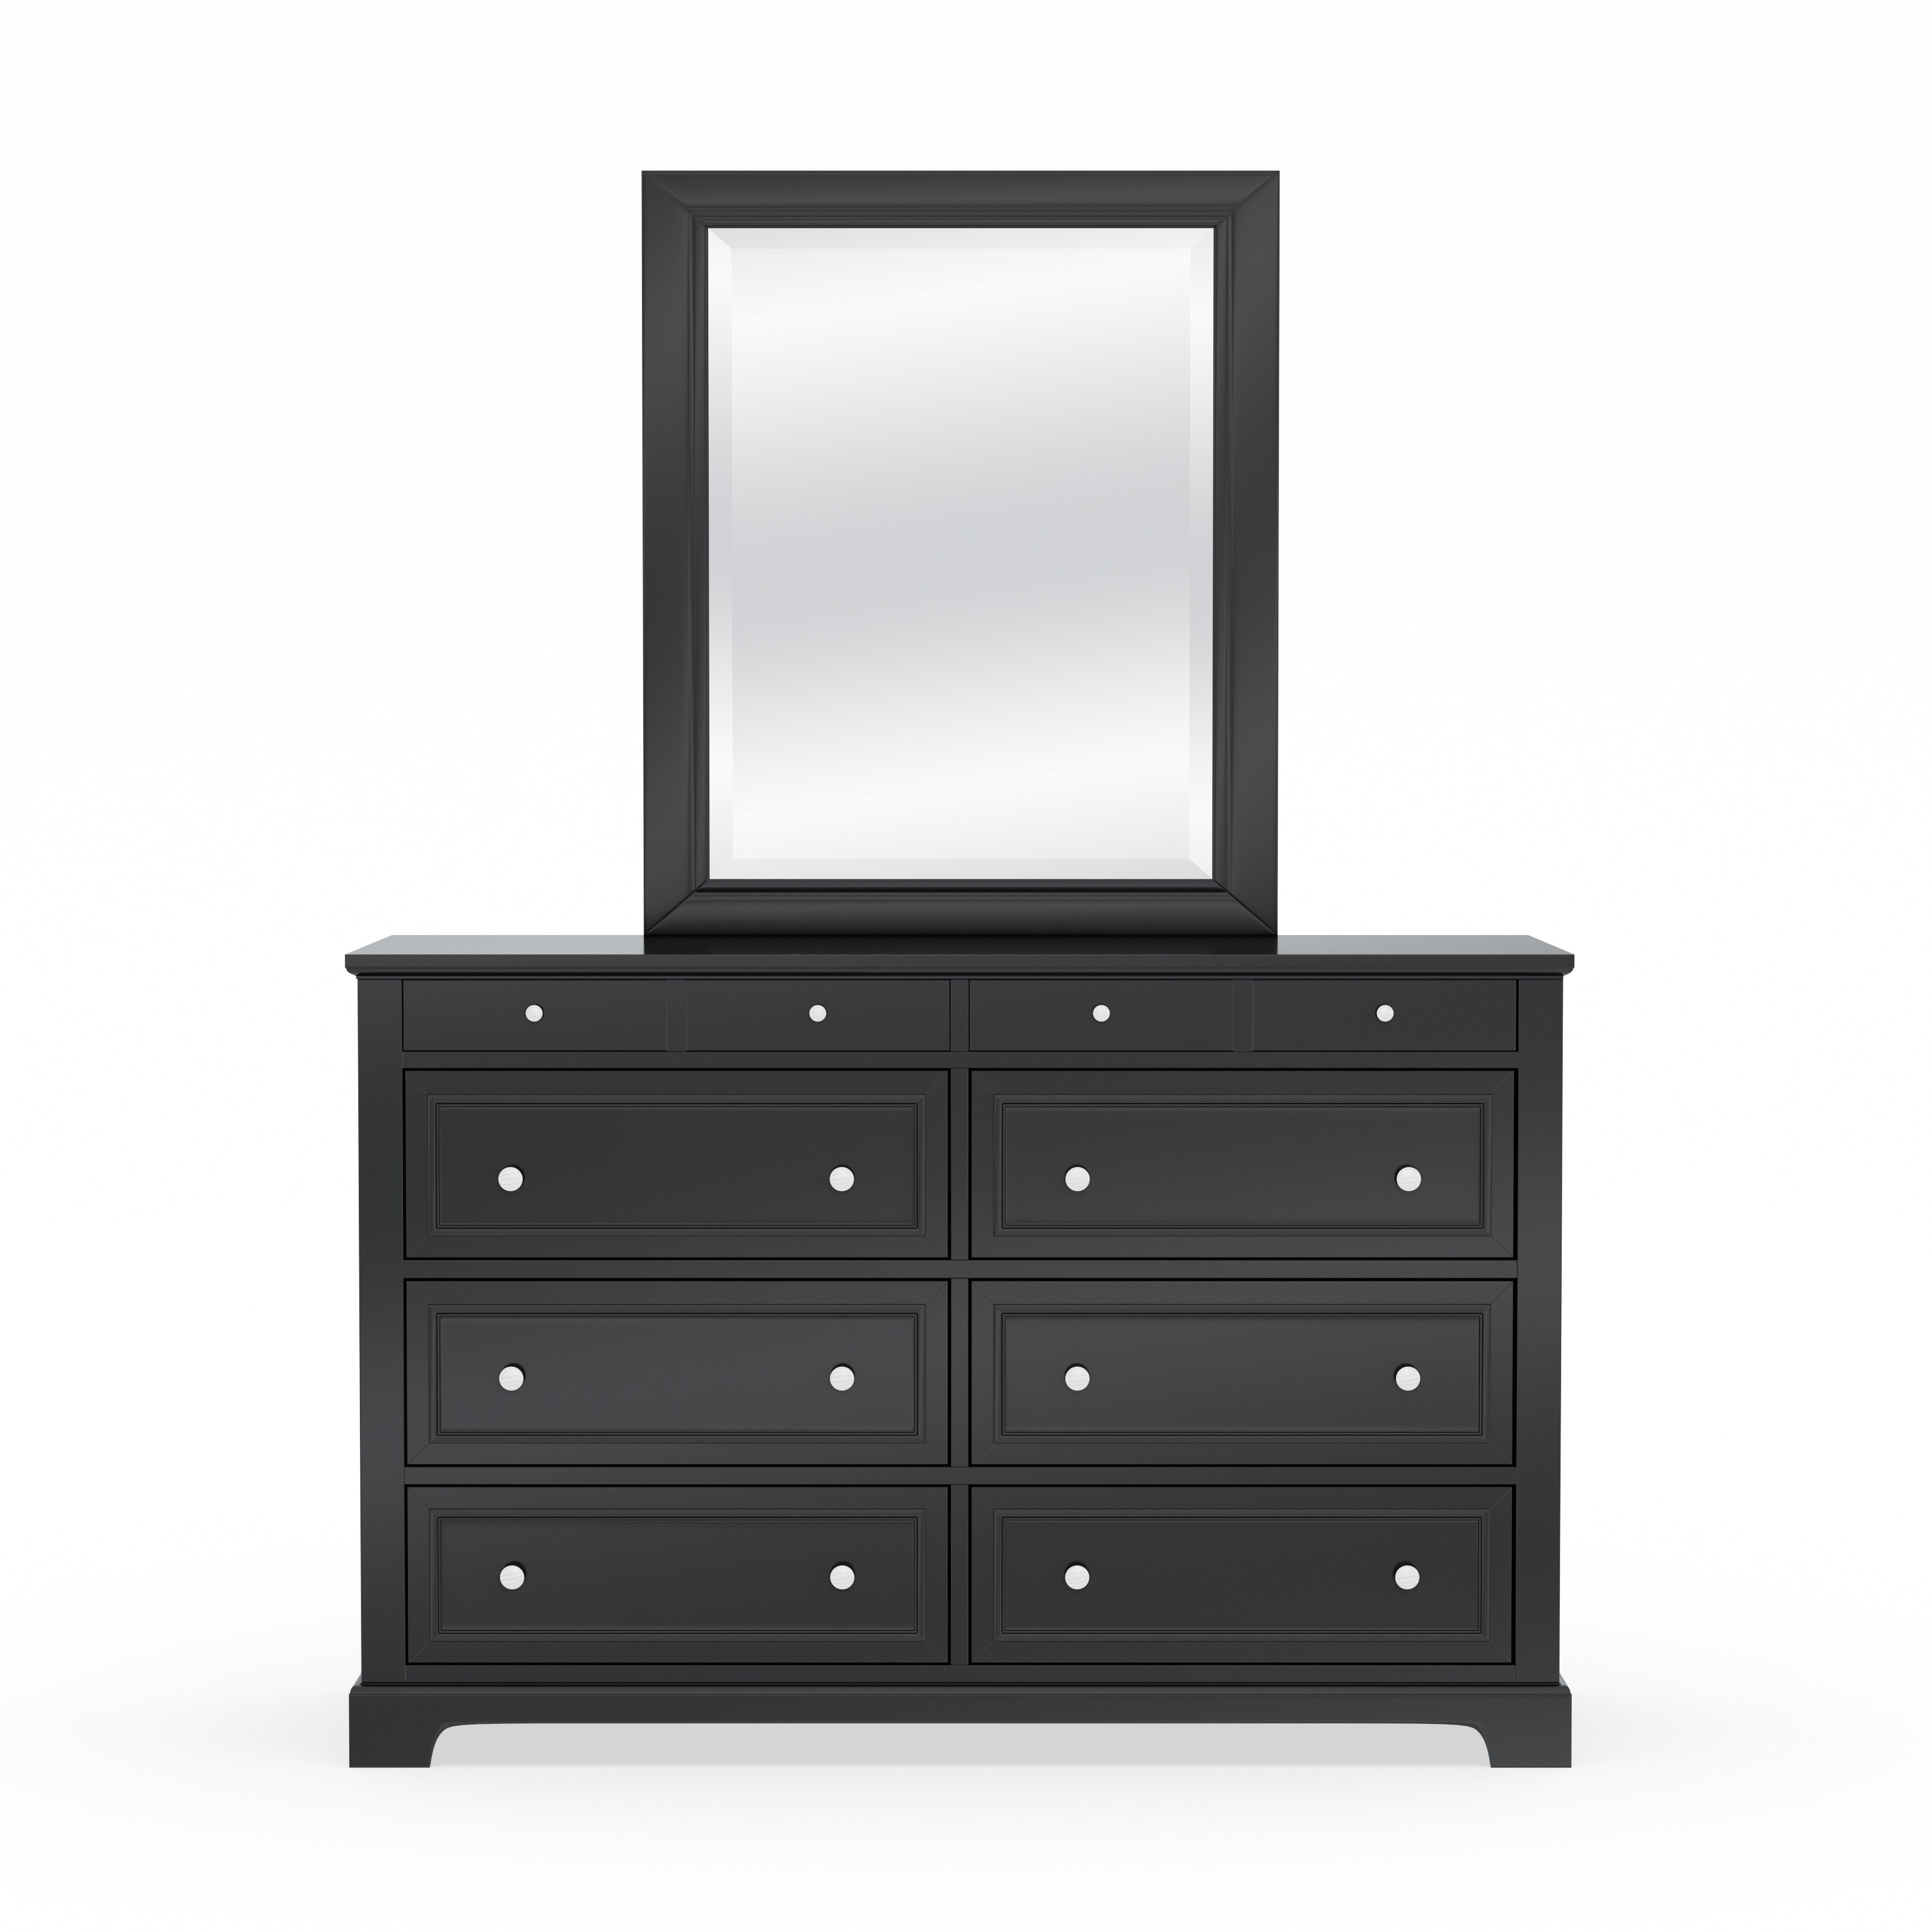 Shop Bedford Black Wood Dresser And Optional Matching Mirror By